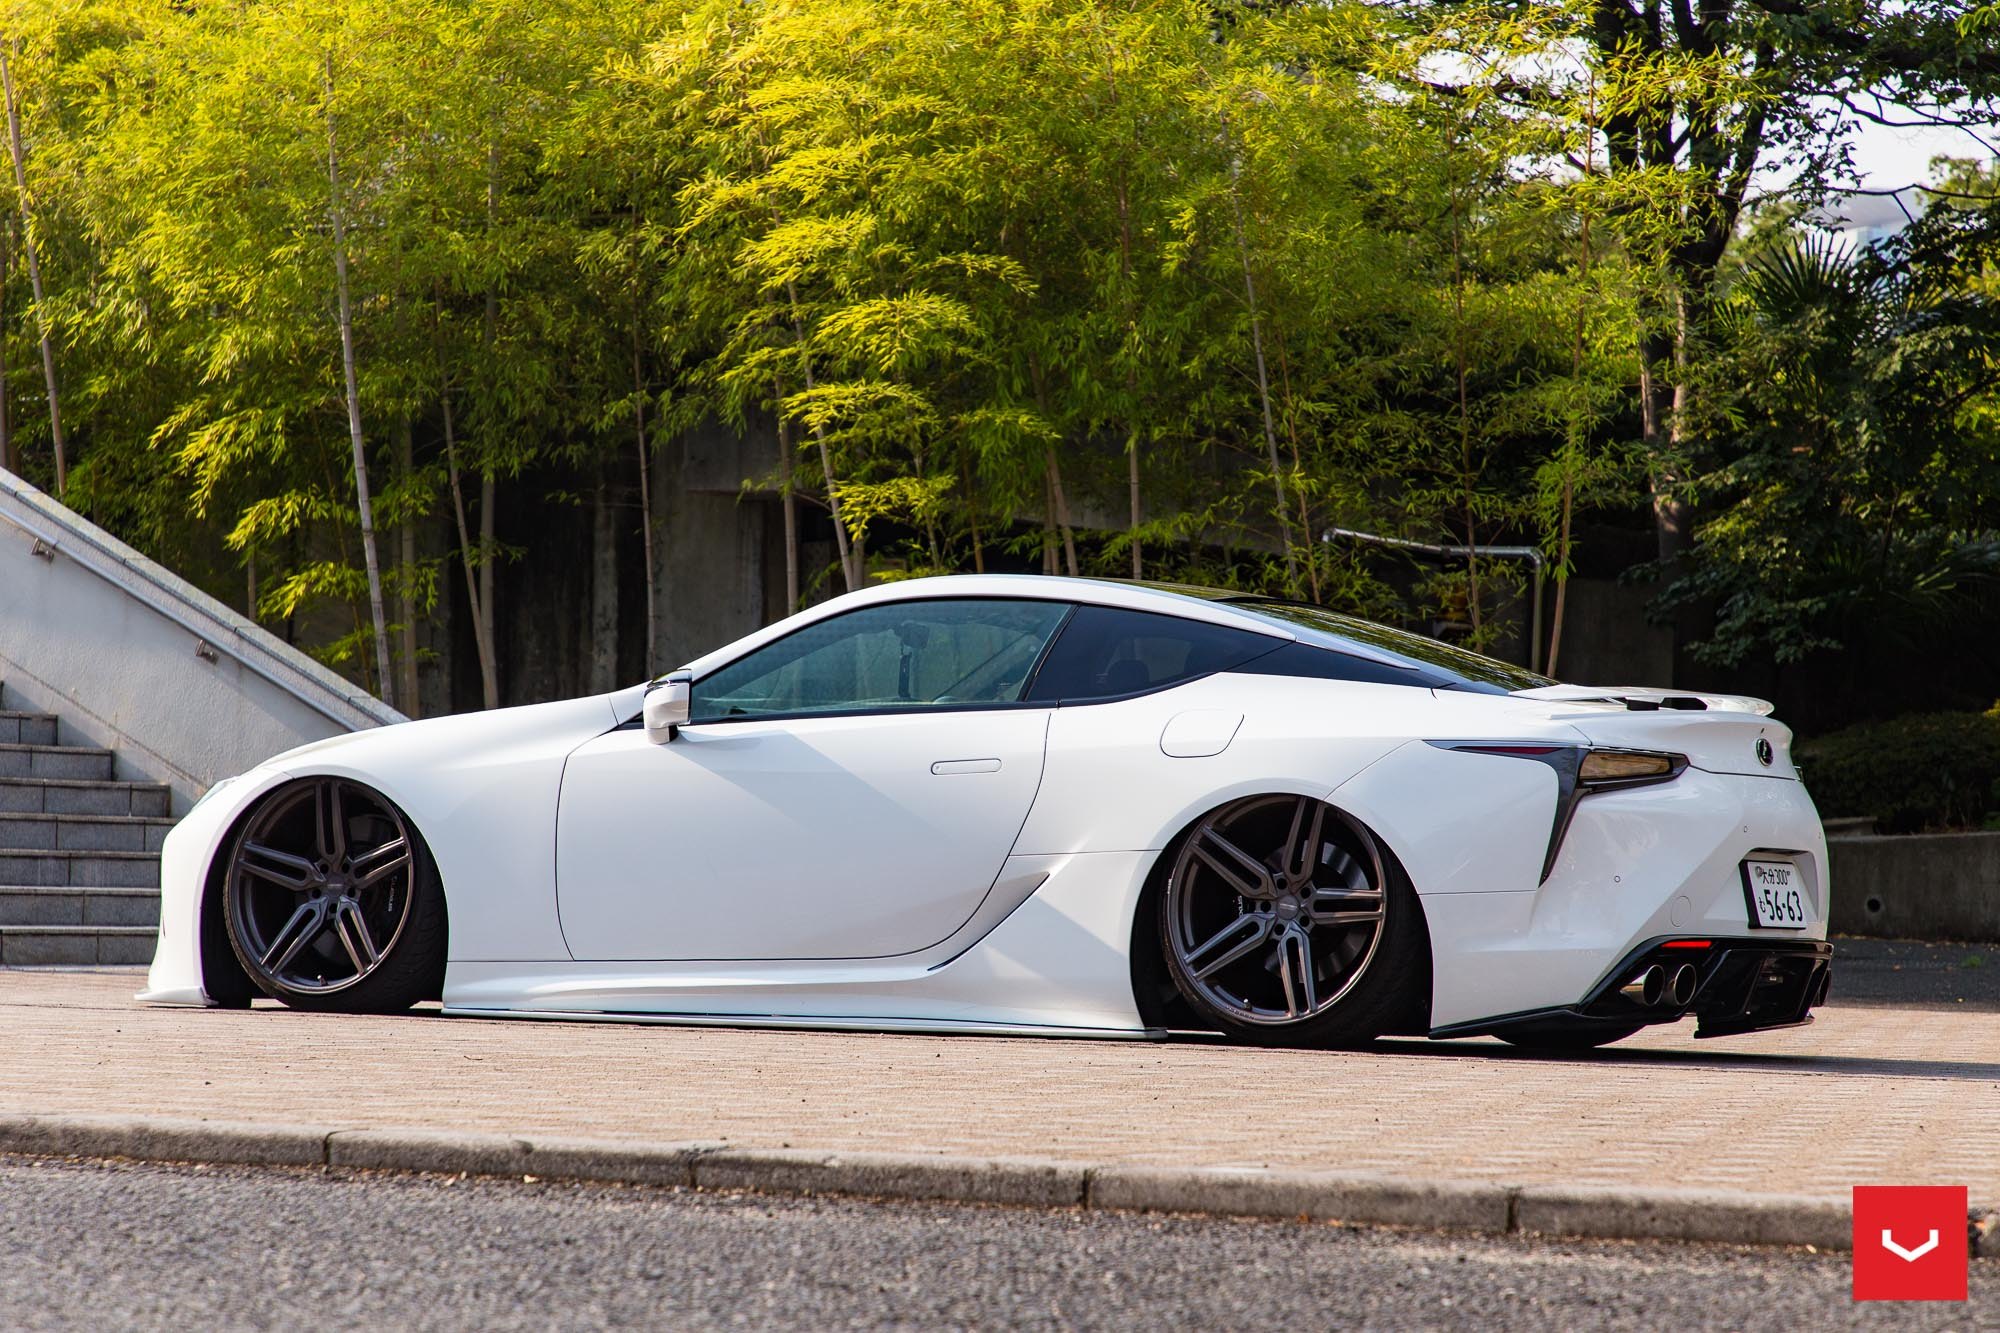 Aftermarket Side Scoops on White Stanced Lexus LC - Photo by Vossen Wheels